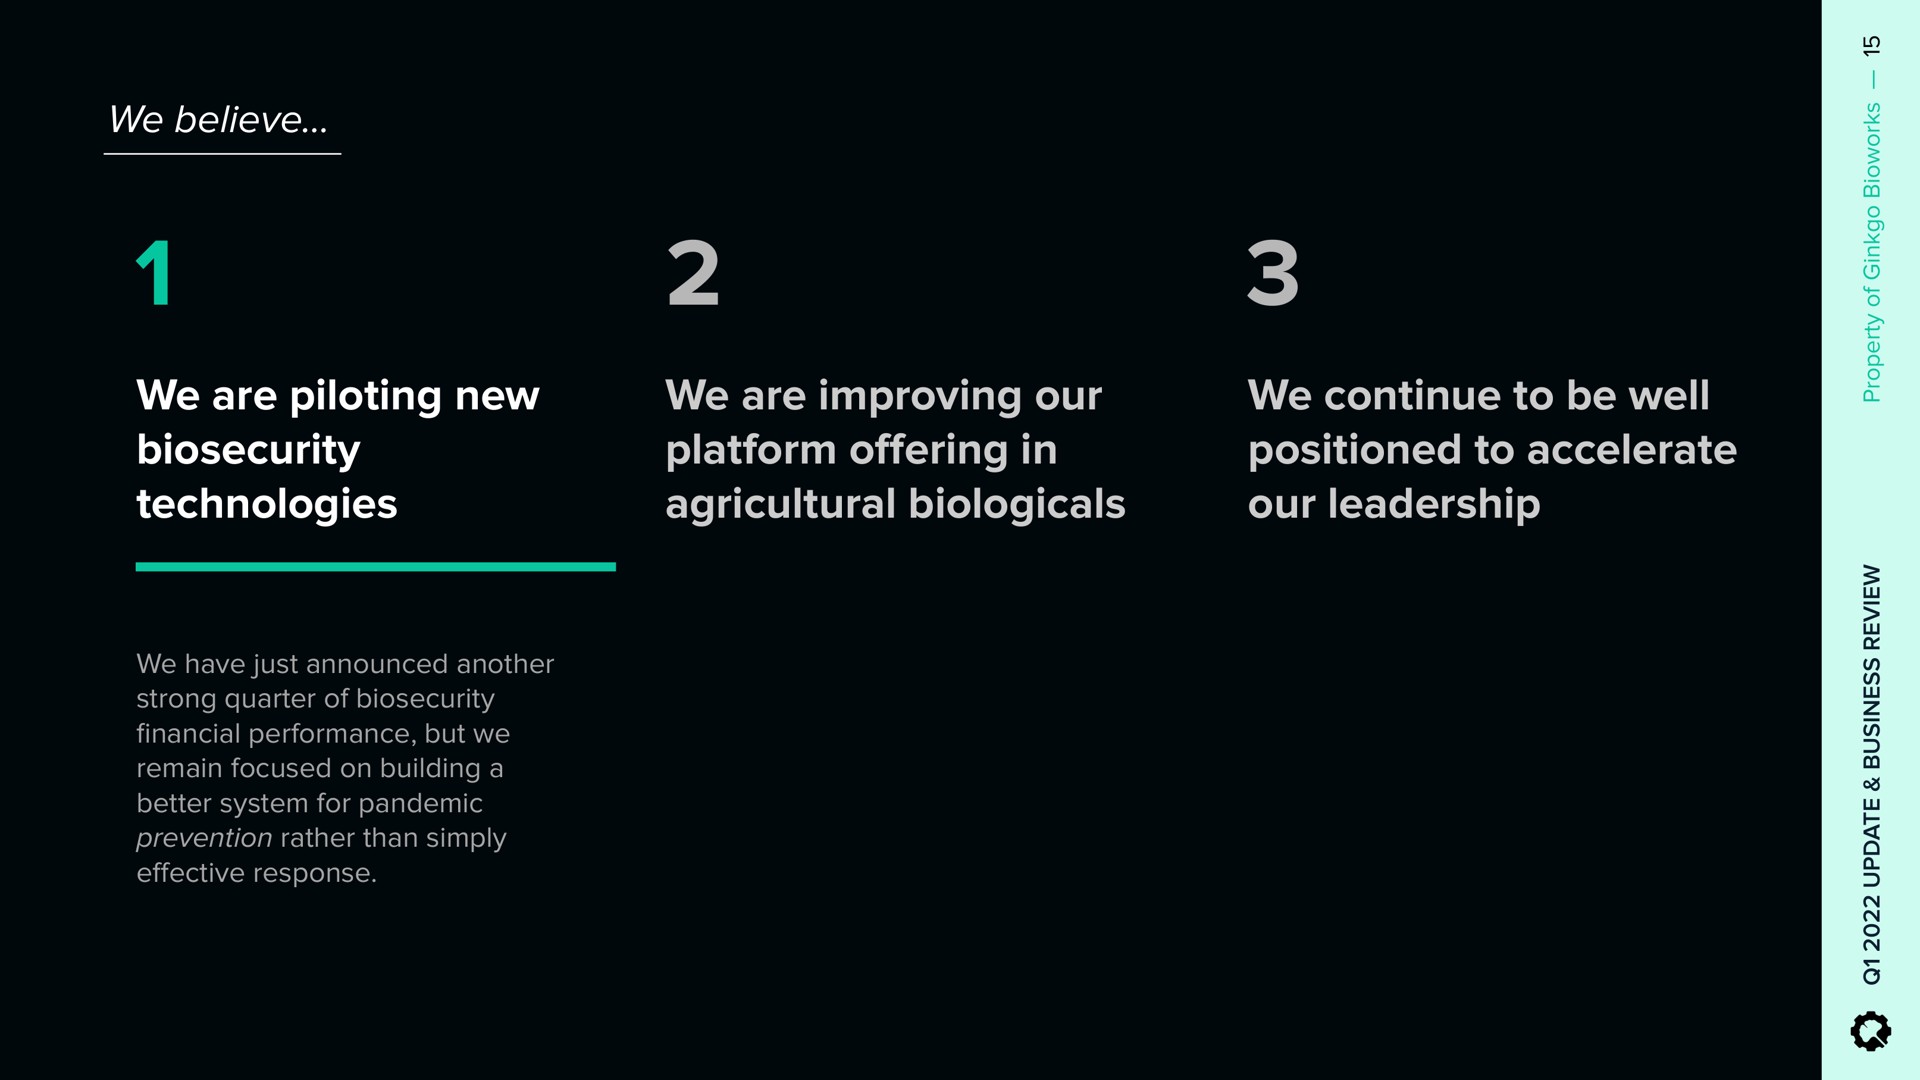 we are piloting new technologies we are improving our platform in agricultural we continue to be well positioned to accelerate our leadership offering | Ginkgo